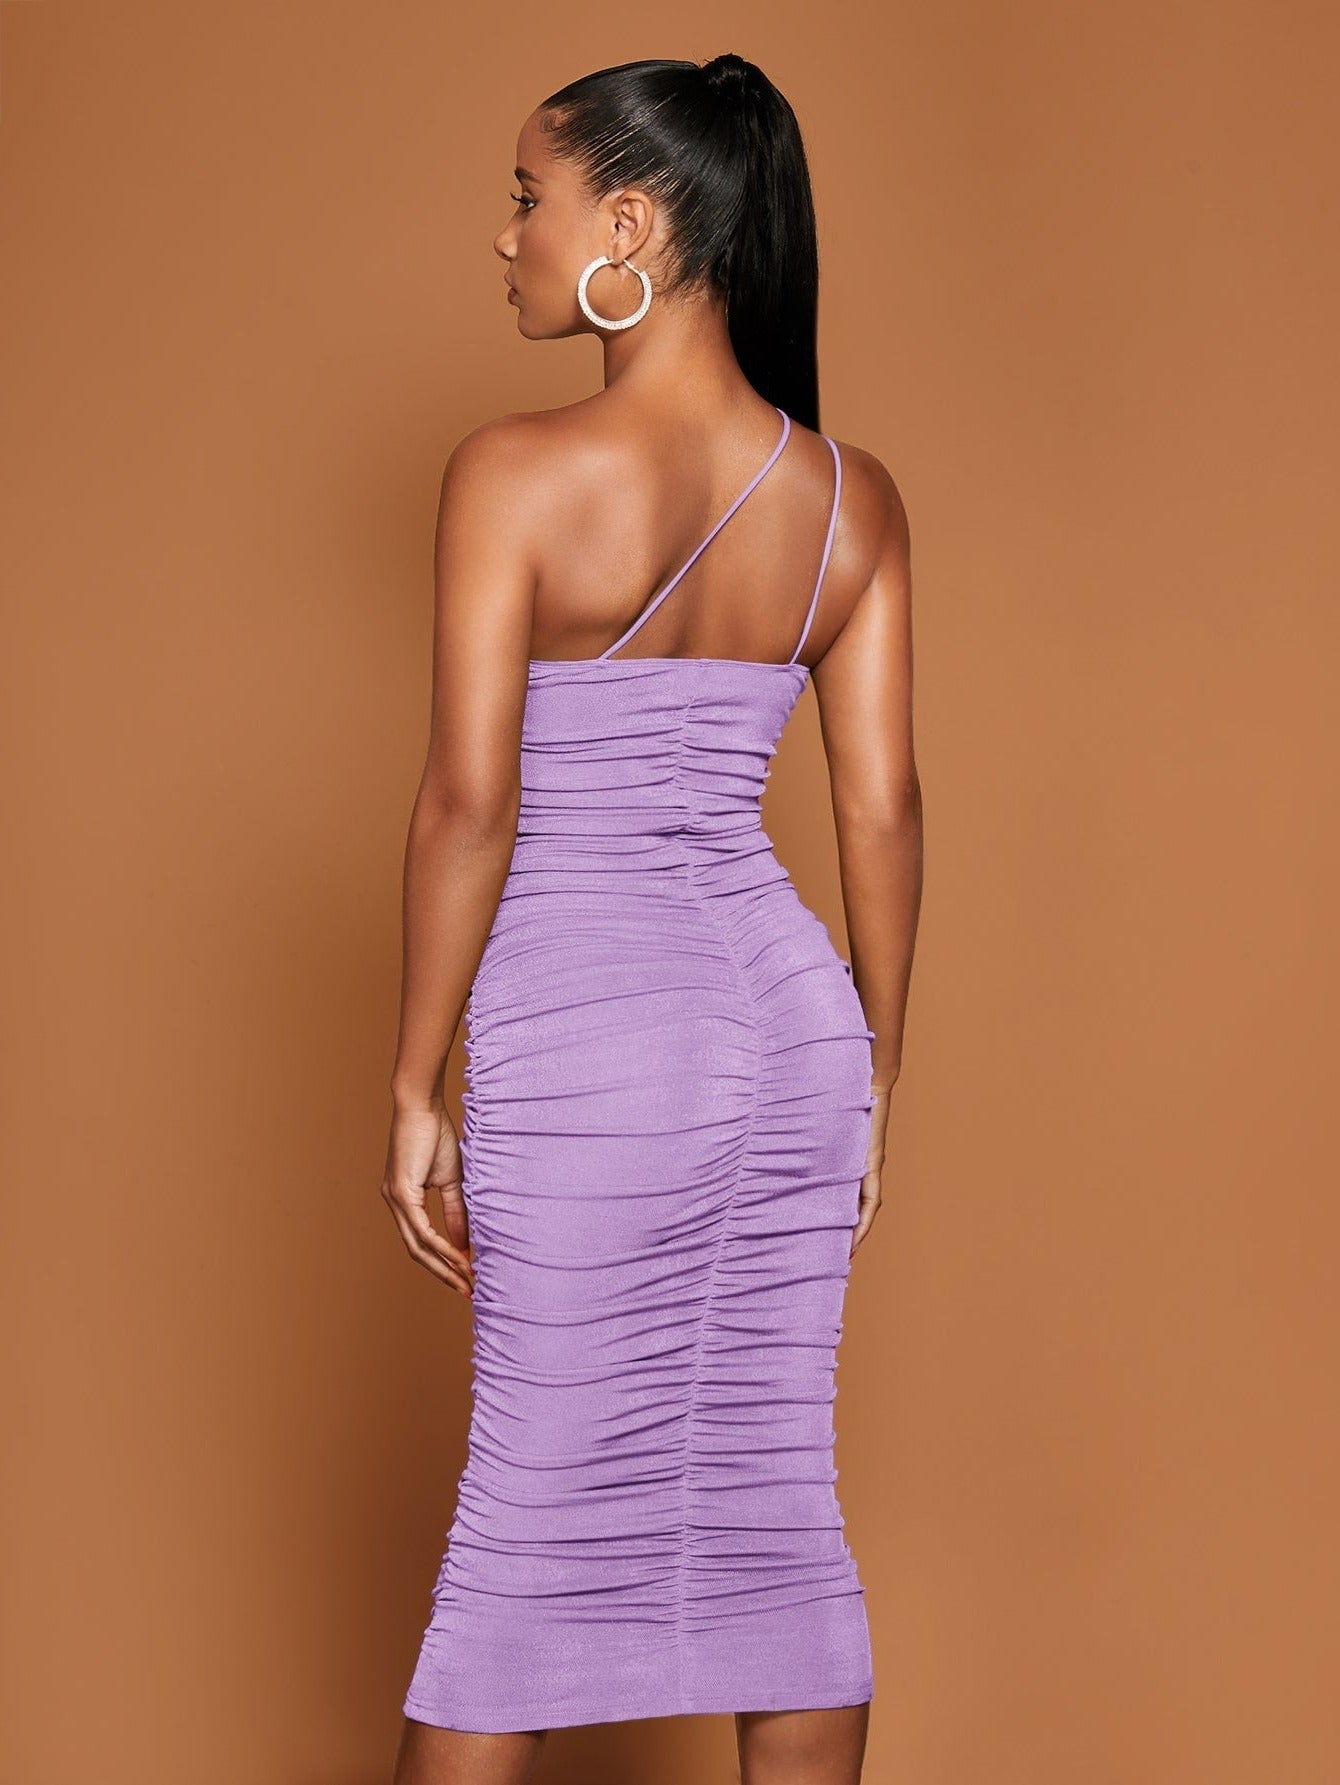 LLstyle One Shoulder Ruched Bodycon Dress